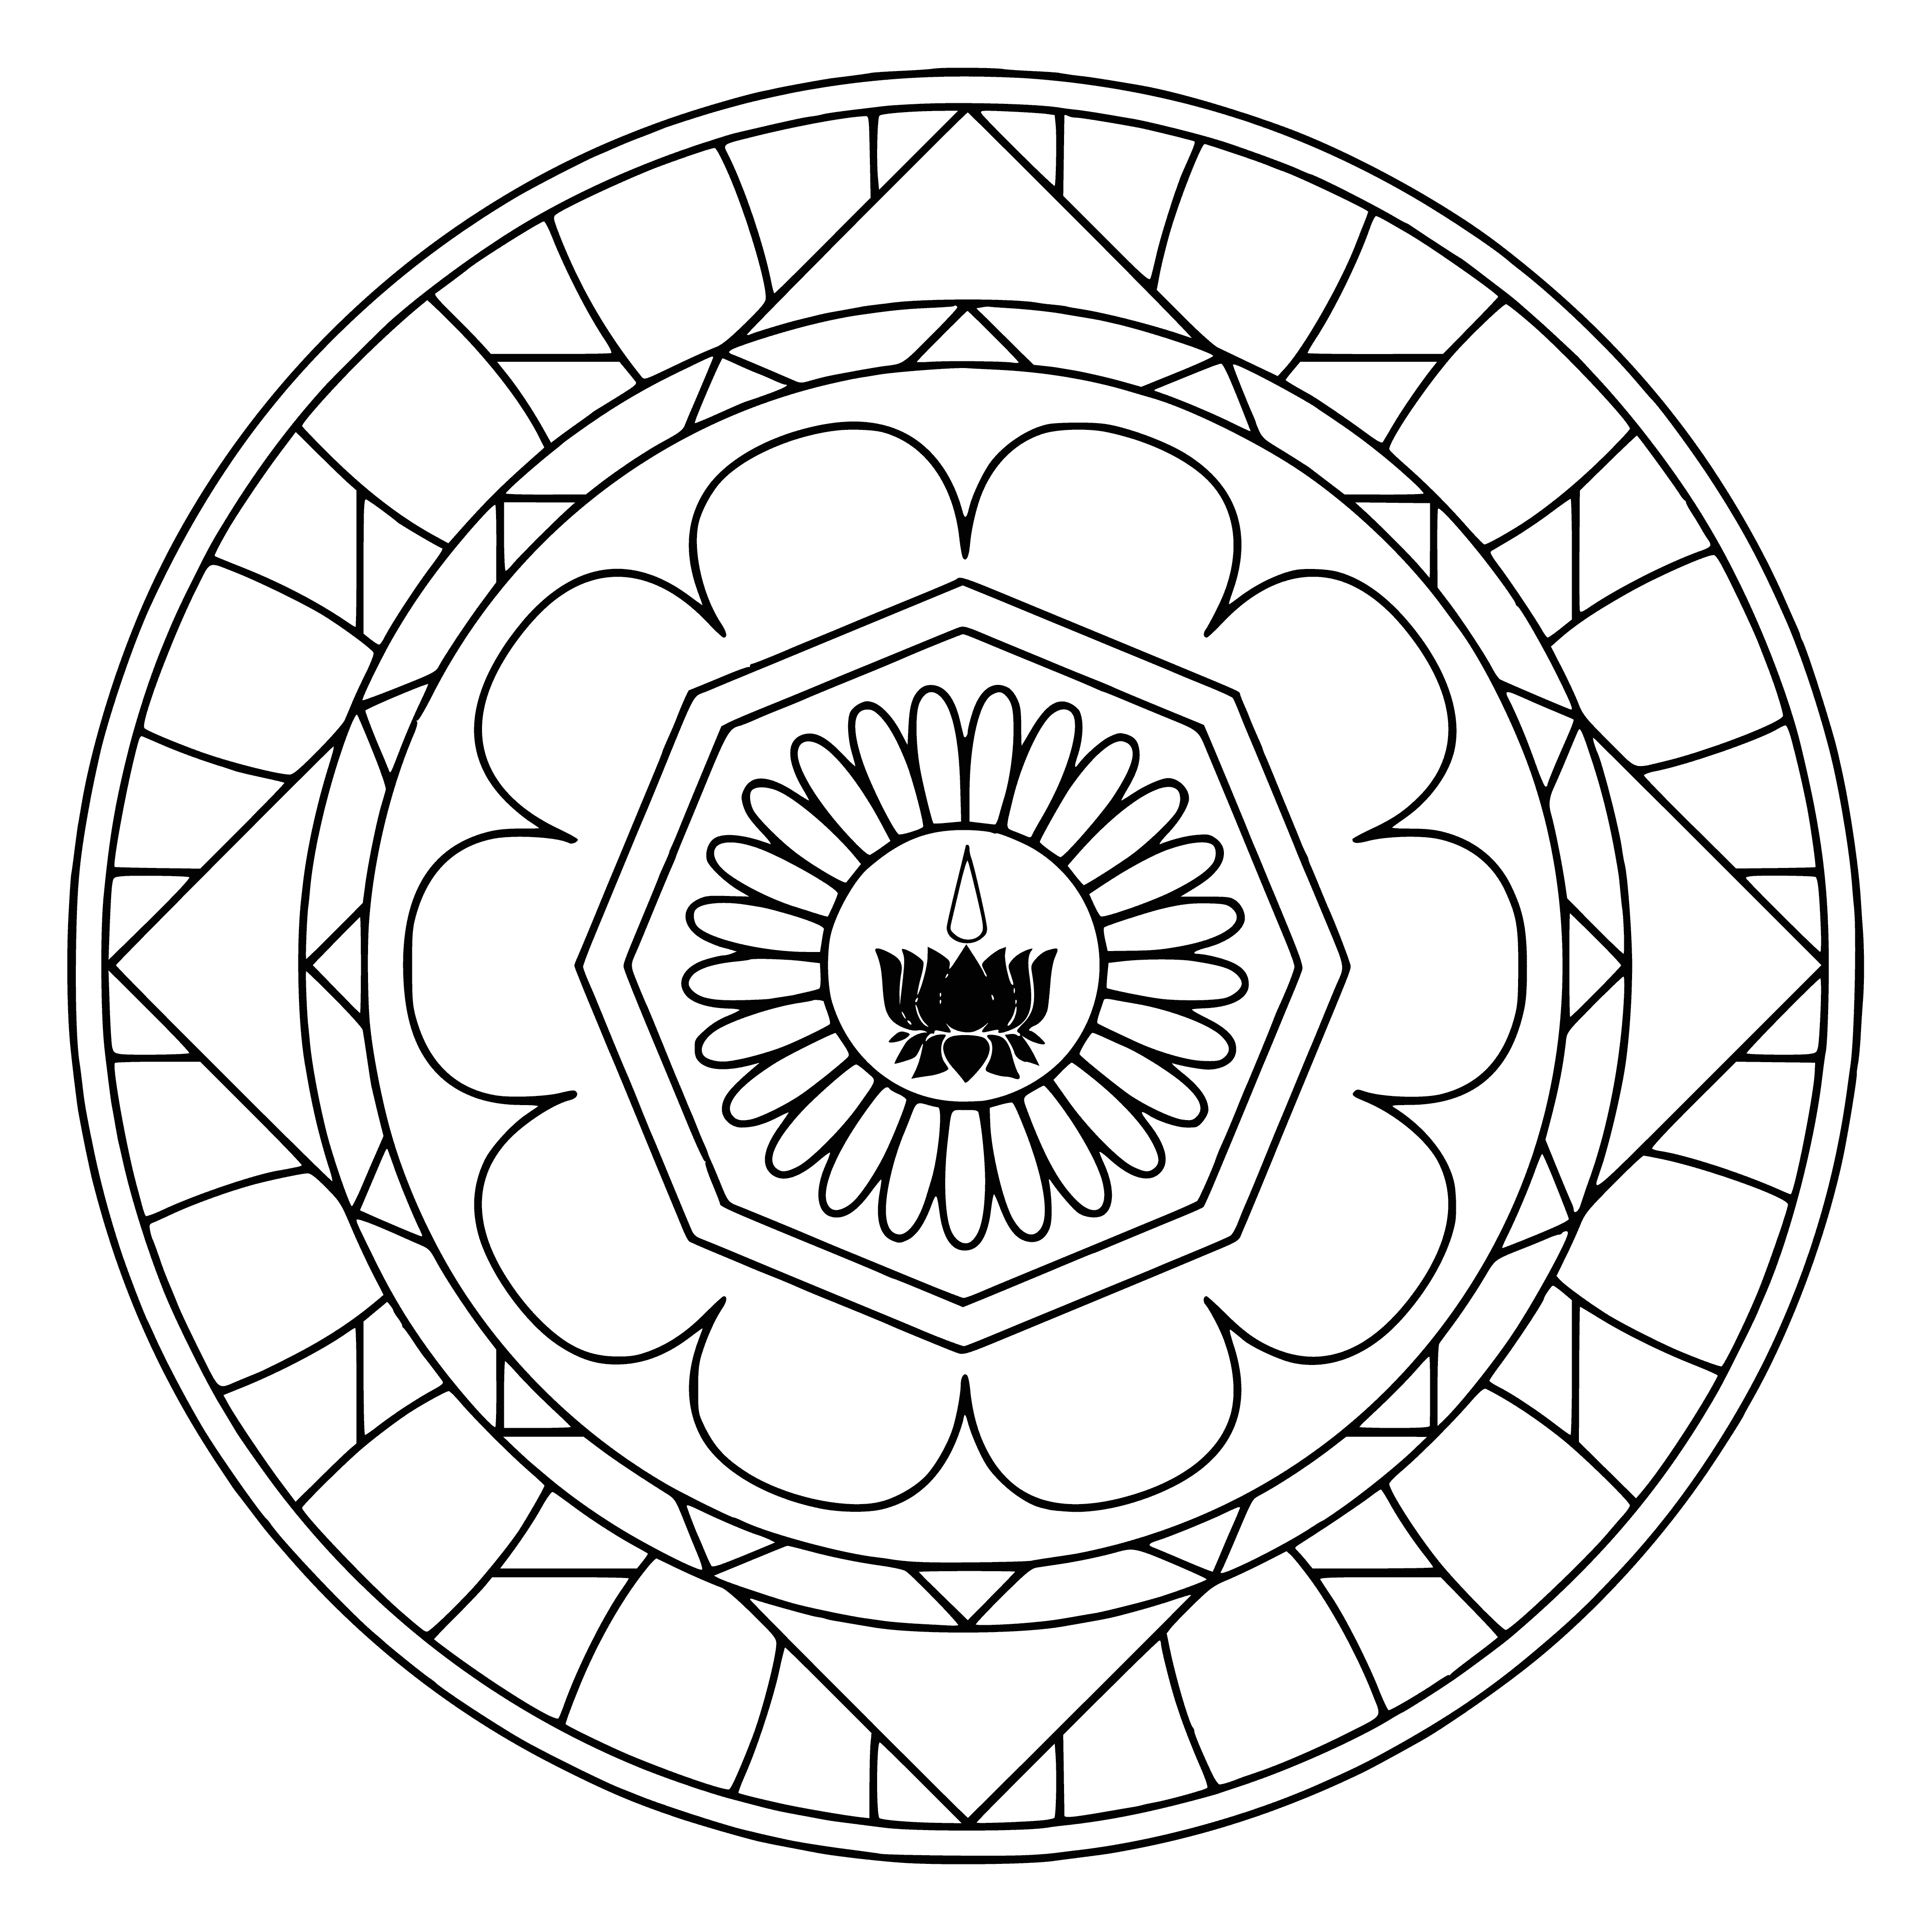 coloring page: A Mandala Coloring Page featuring Ayyavazhi symbol in the center surrounded by a square with Aum symbols in corners & geometric patterns.